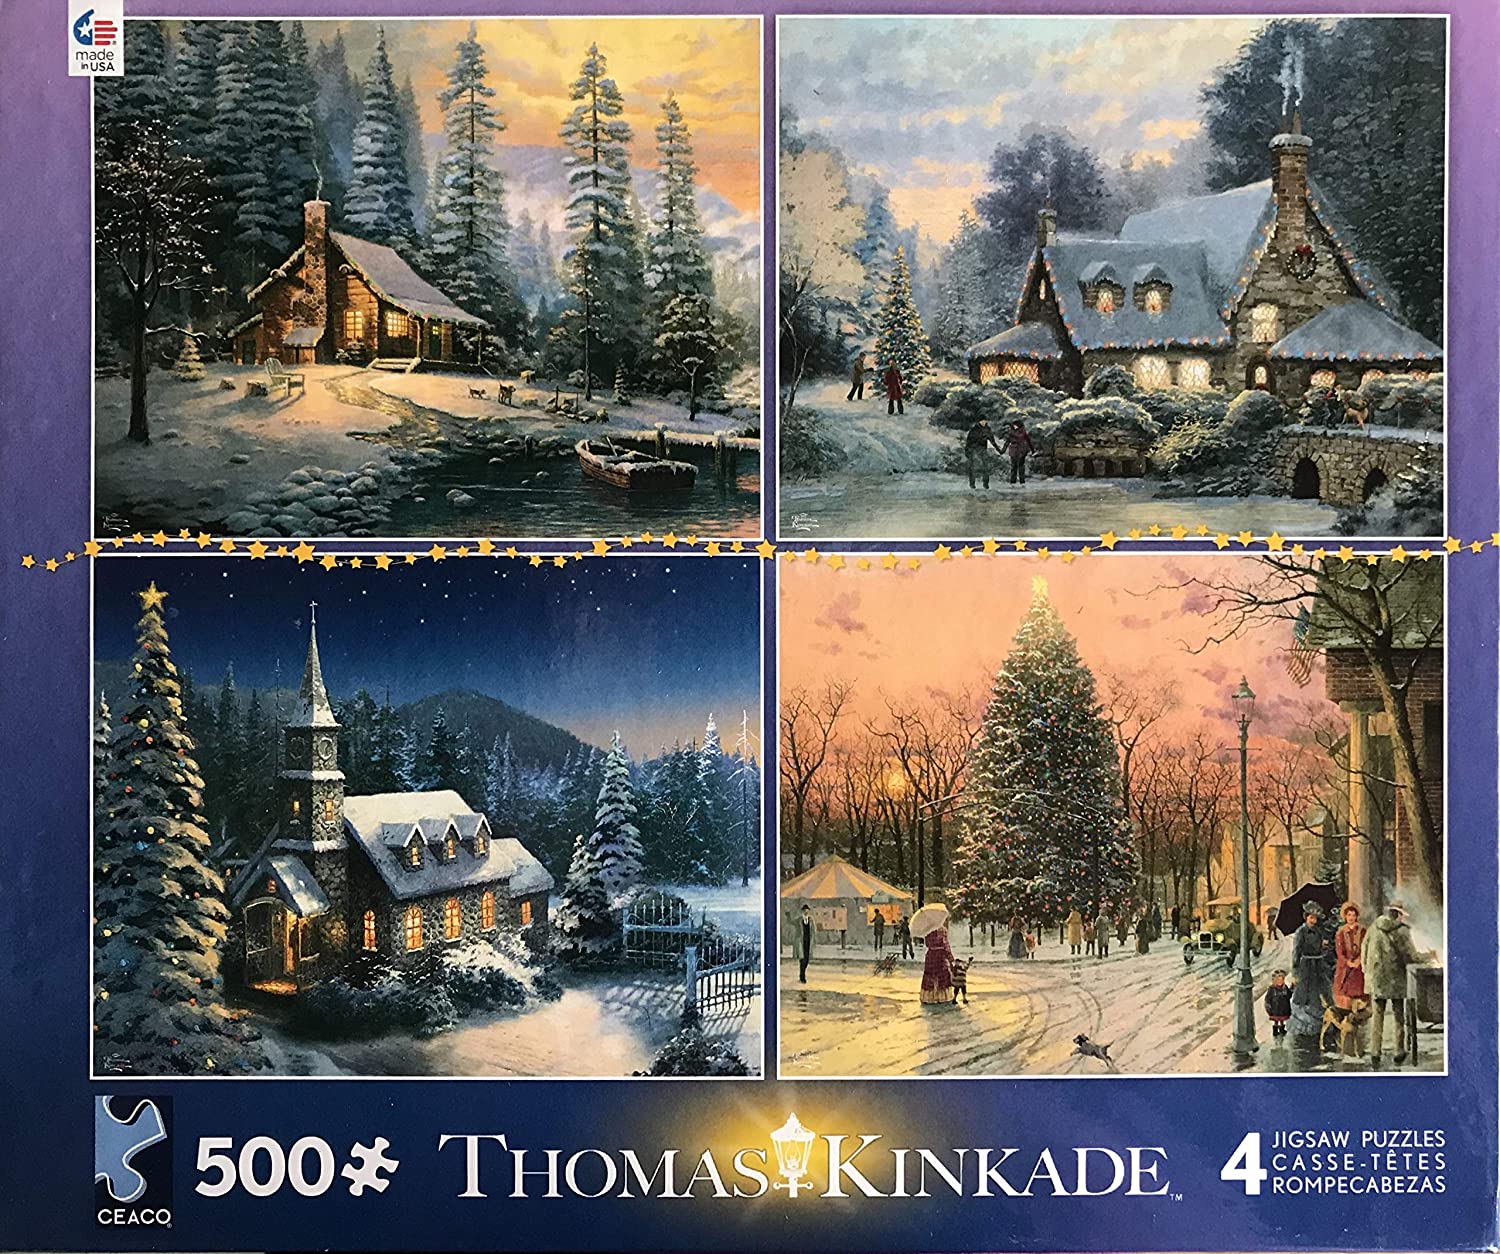 BRAND NEW Disney Parks Exclusive Thomas Kinkade Puzzle 4 in 1 500 Piece  Puzzles